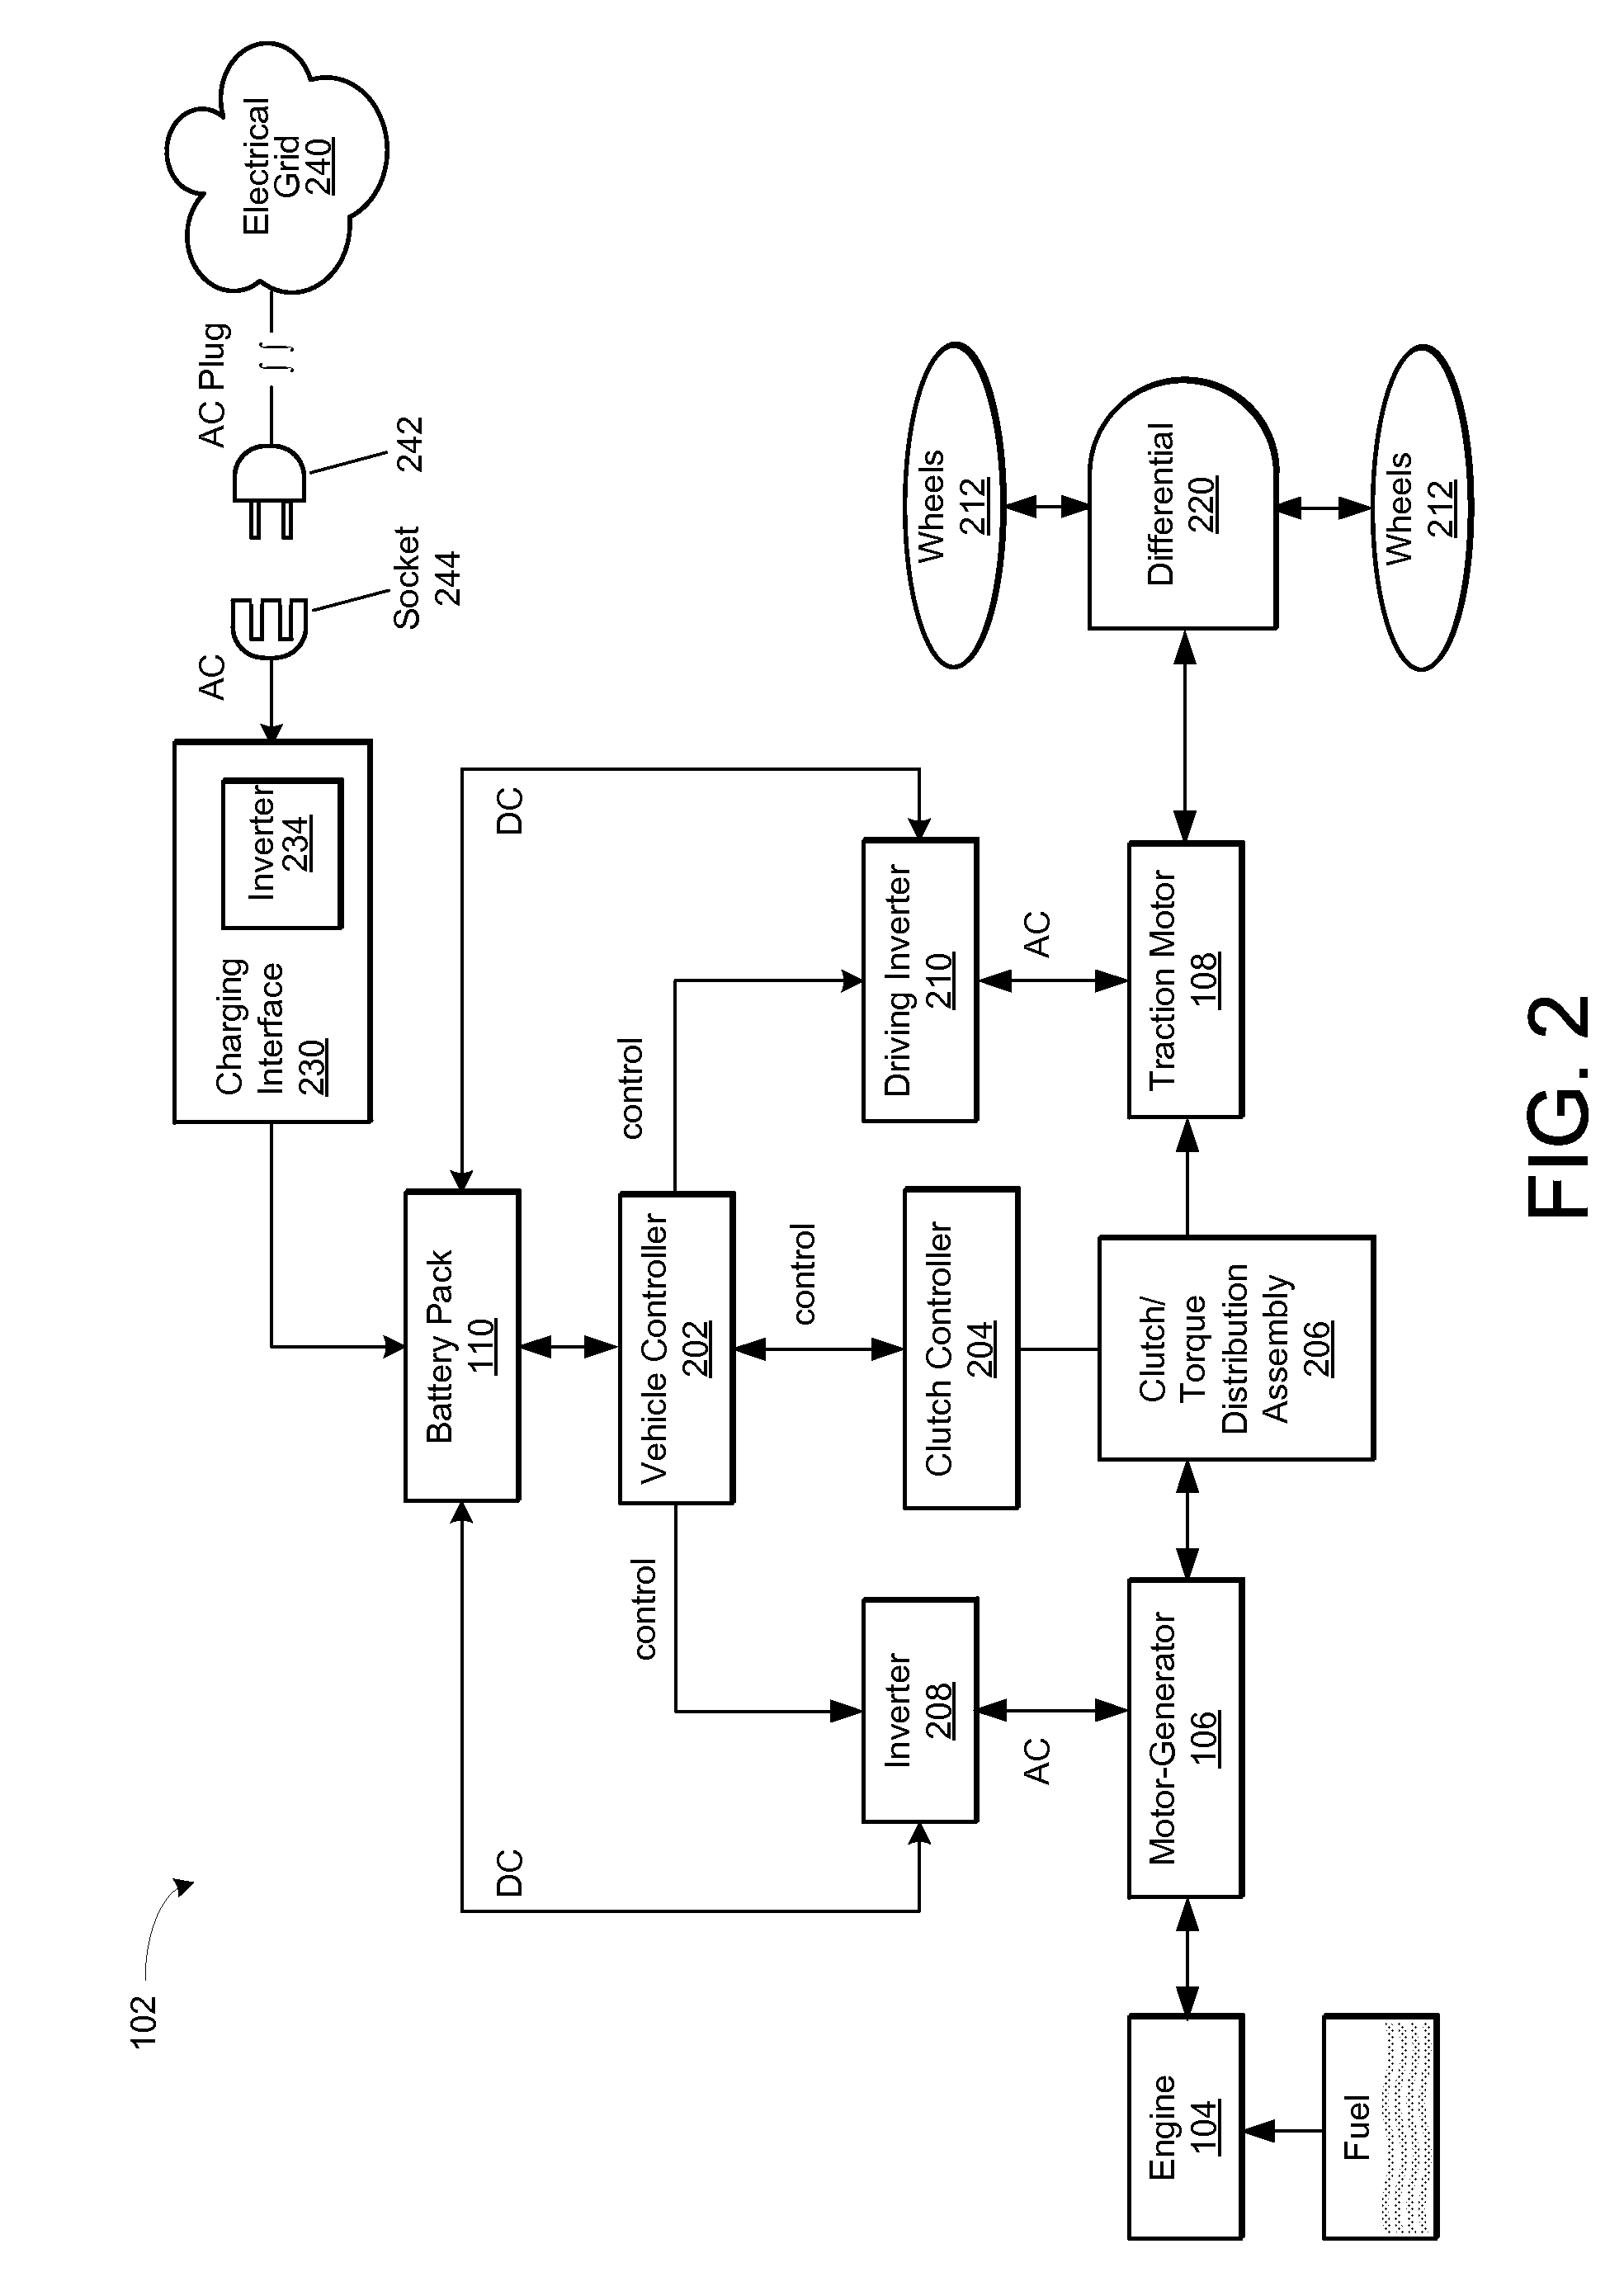 Hybrid Vehicle Having Engagable Clutch Assembly Coupled Between Engine And Traction Motor